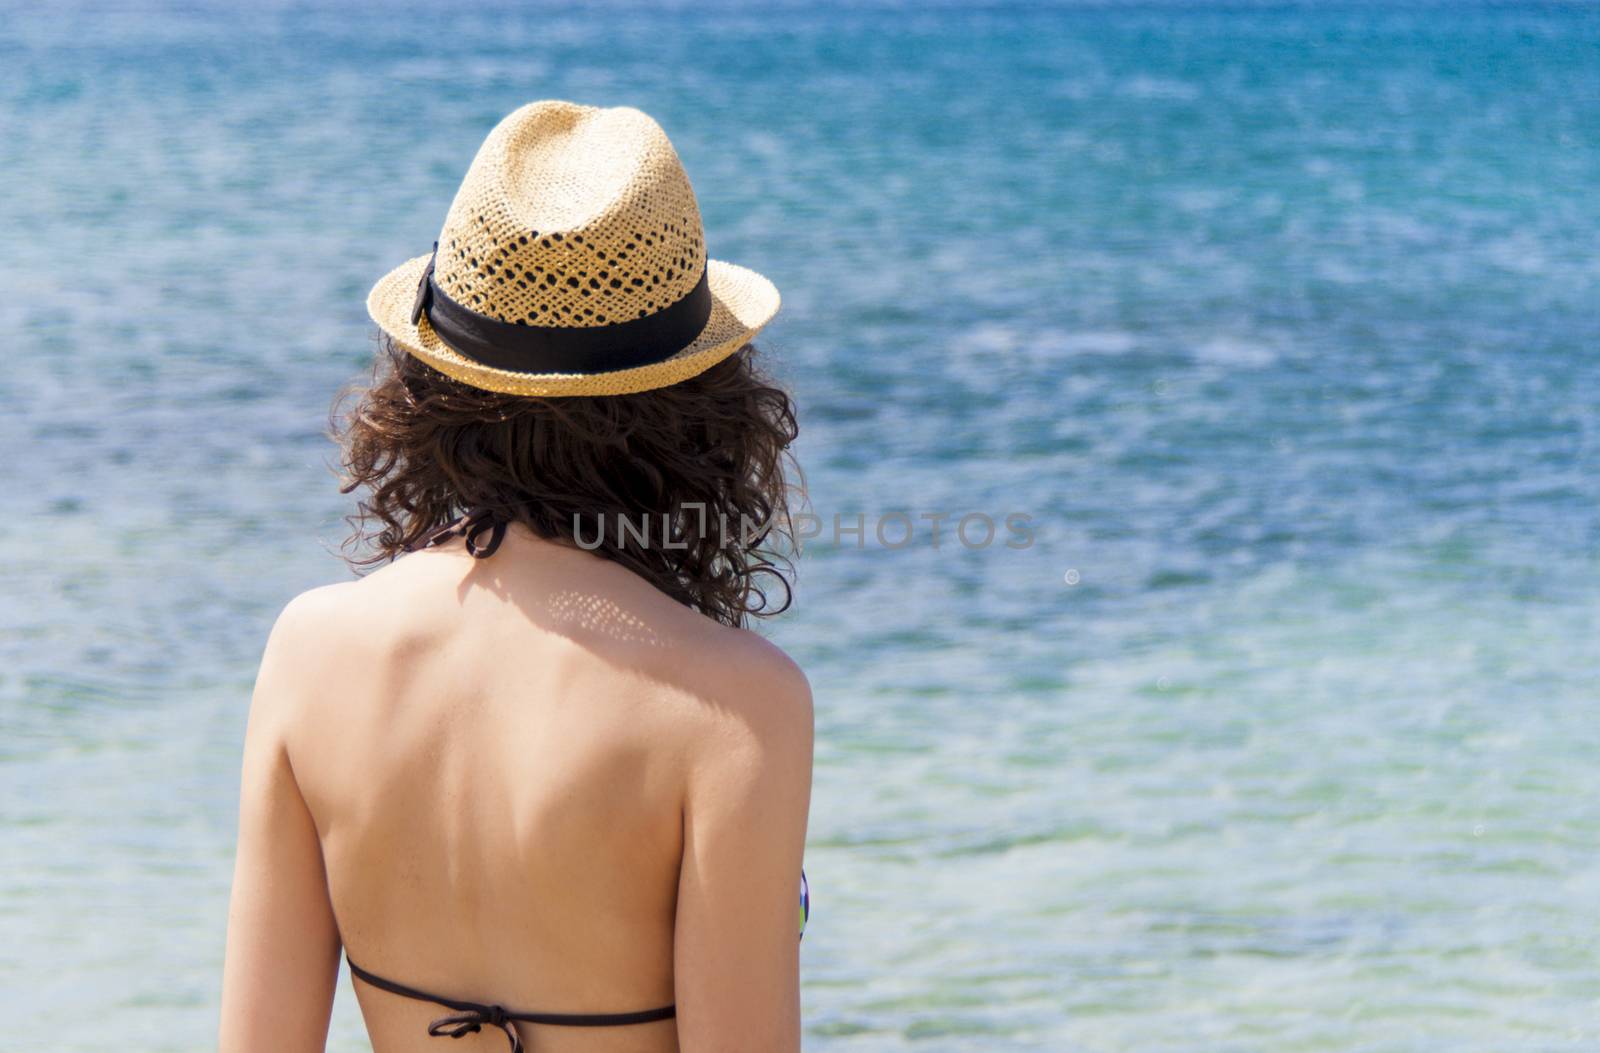 Beach vacation. Beautiful woman in sunhat and bikini looking view of beach ocean on hot summer day. Photo from Fuerteventura Island, Spain by tanaonte